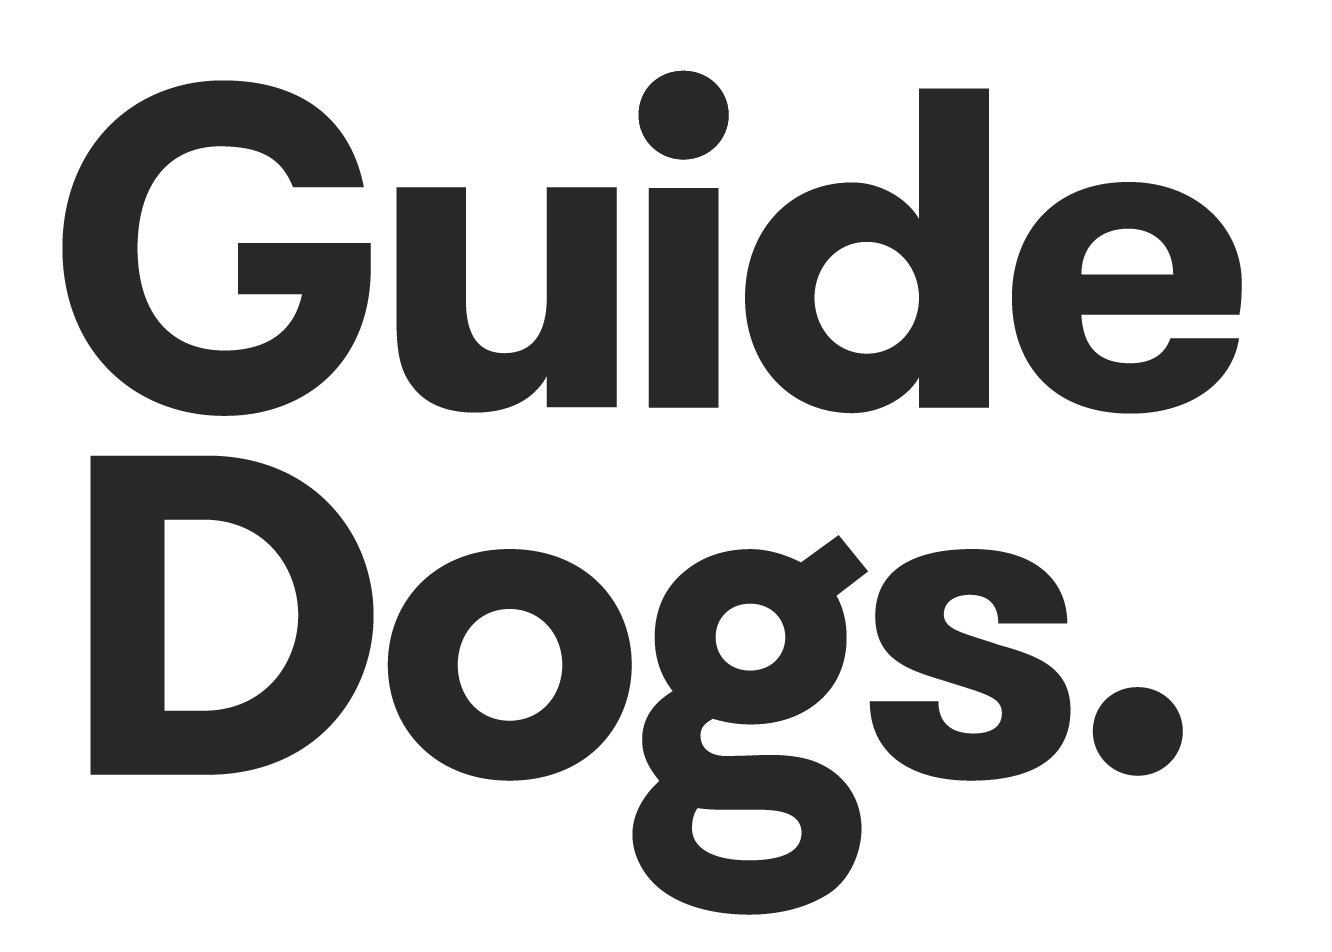 Guide Dogs NSW/ACT Logo